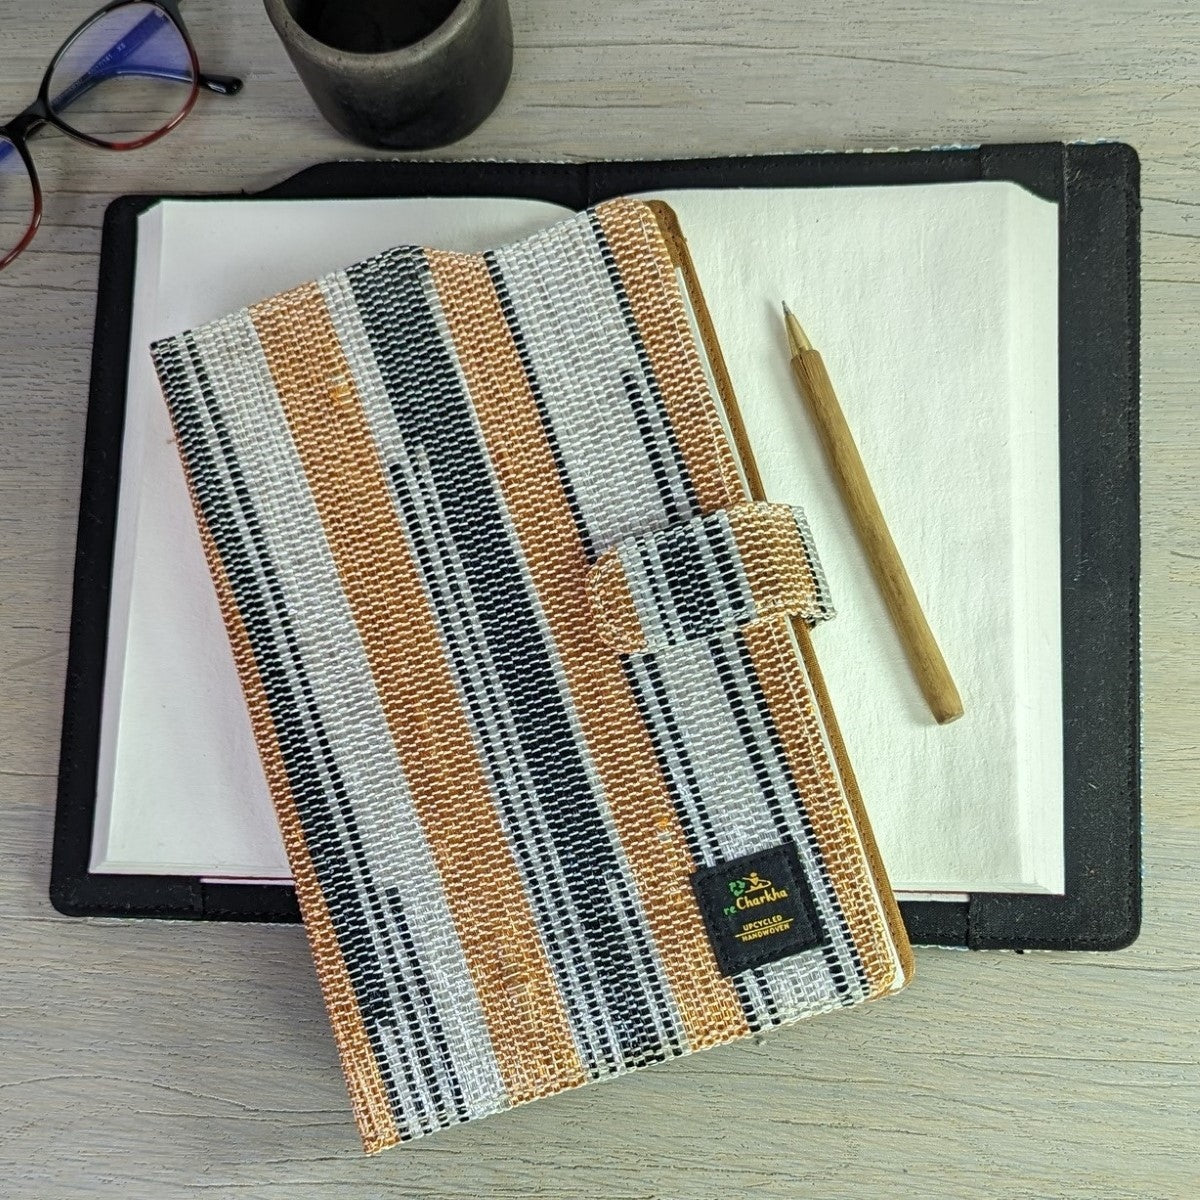 (EDC0224-106) Orange Glitter with Black and White Bands Upcycled Handwoven Executive Diary Cover